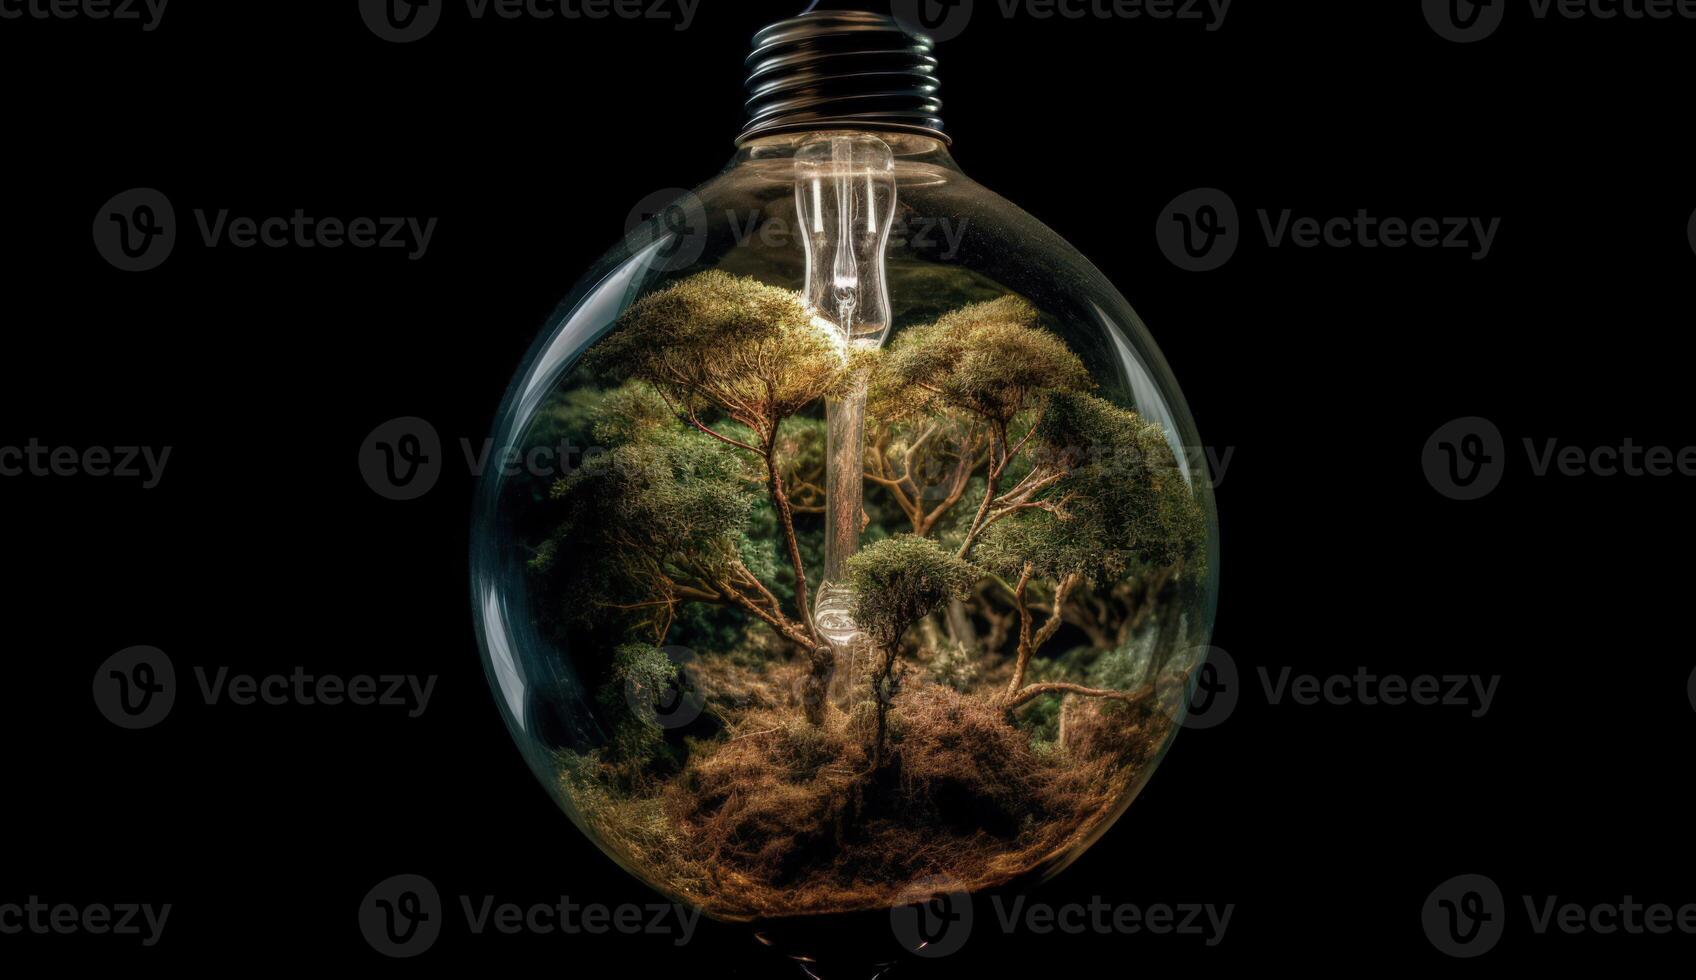 Glowing Incandescent Light Bulb with Green Plant Inside, Symbolizing Eco Friendly Innovation and Energy Conservation. photo